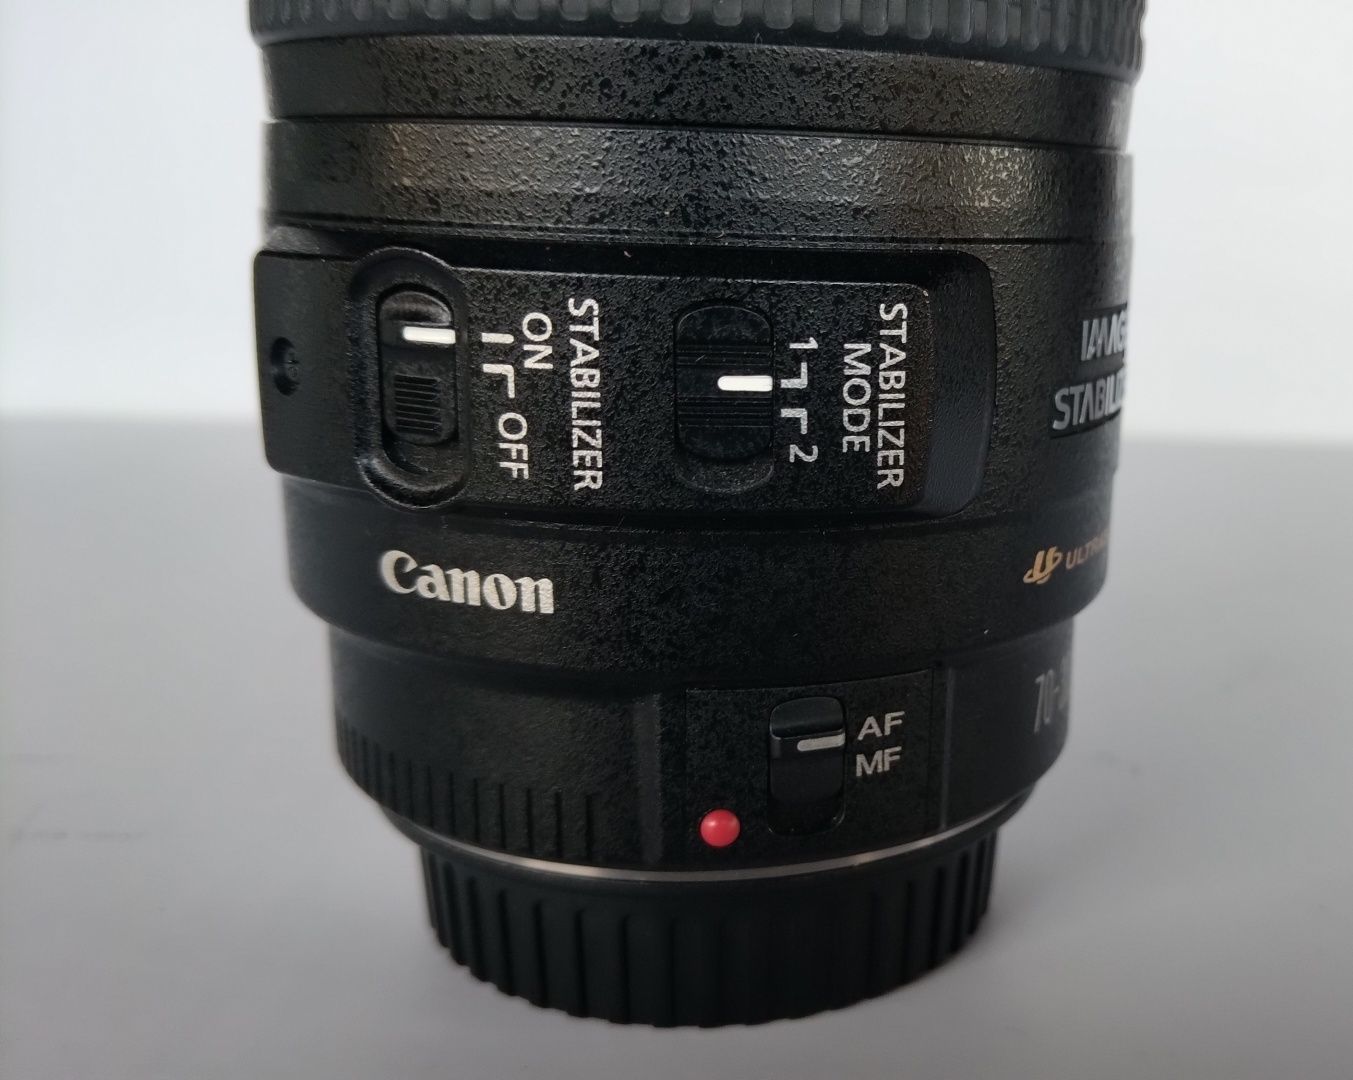 Objectiva Zoom Canon EF 70-300mm F4-5.6 IS USM.